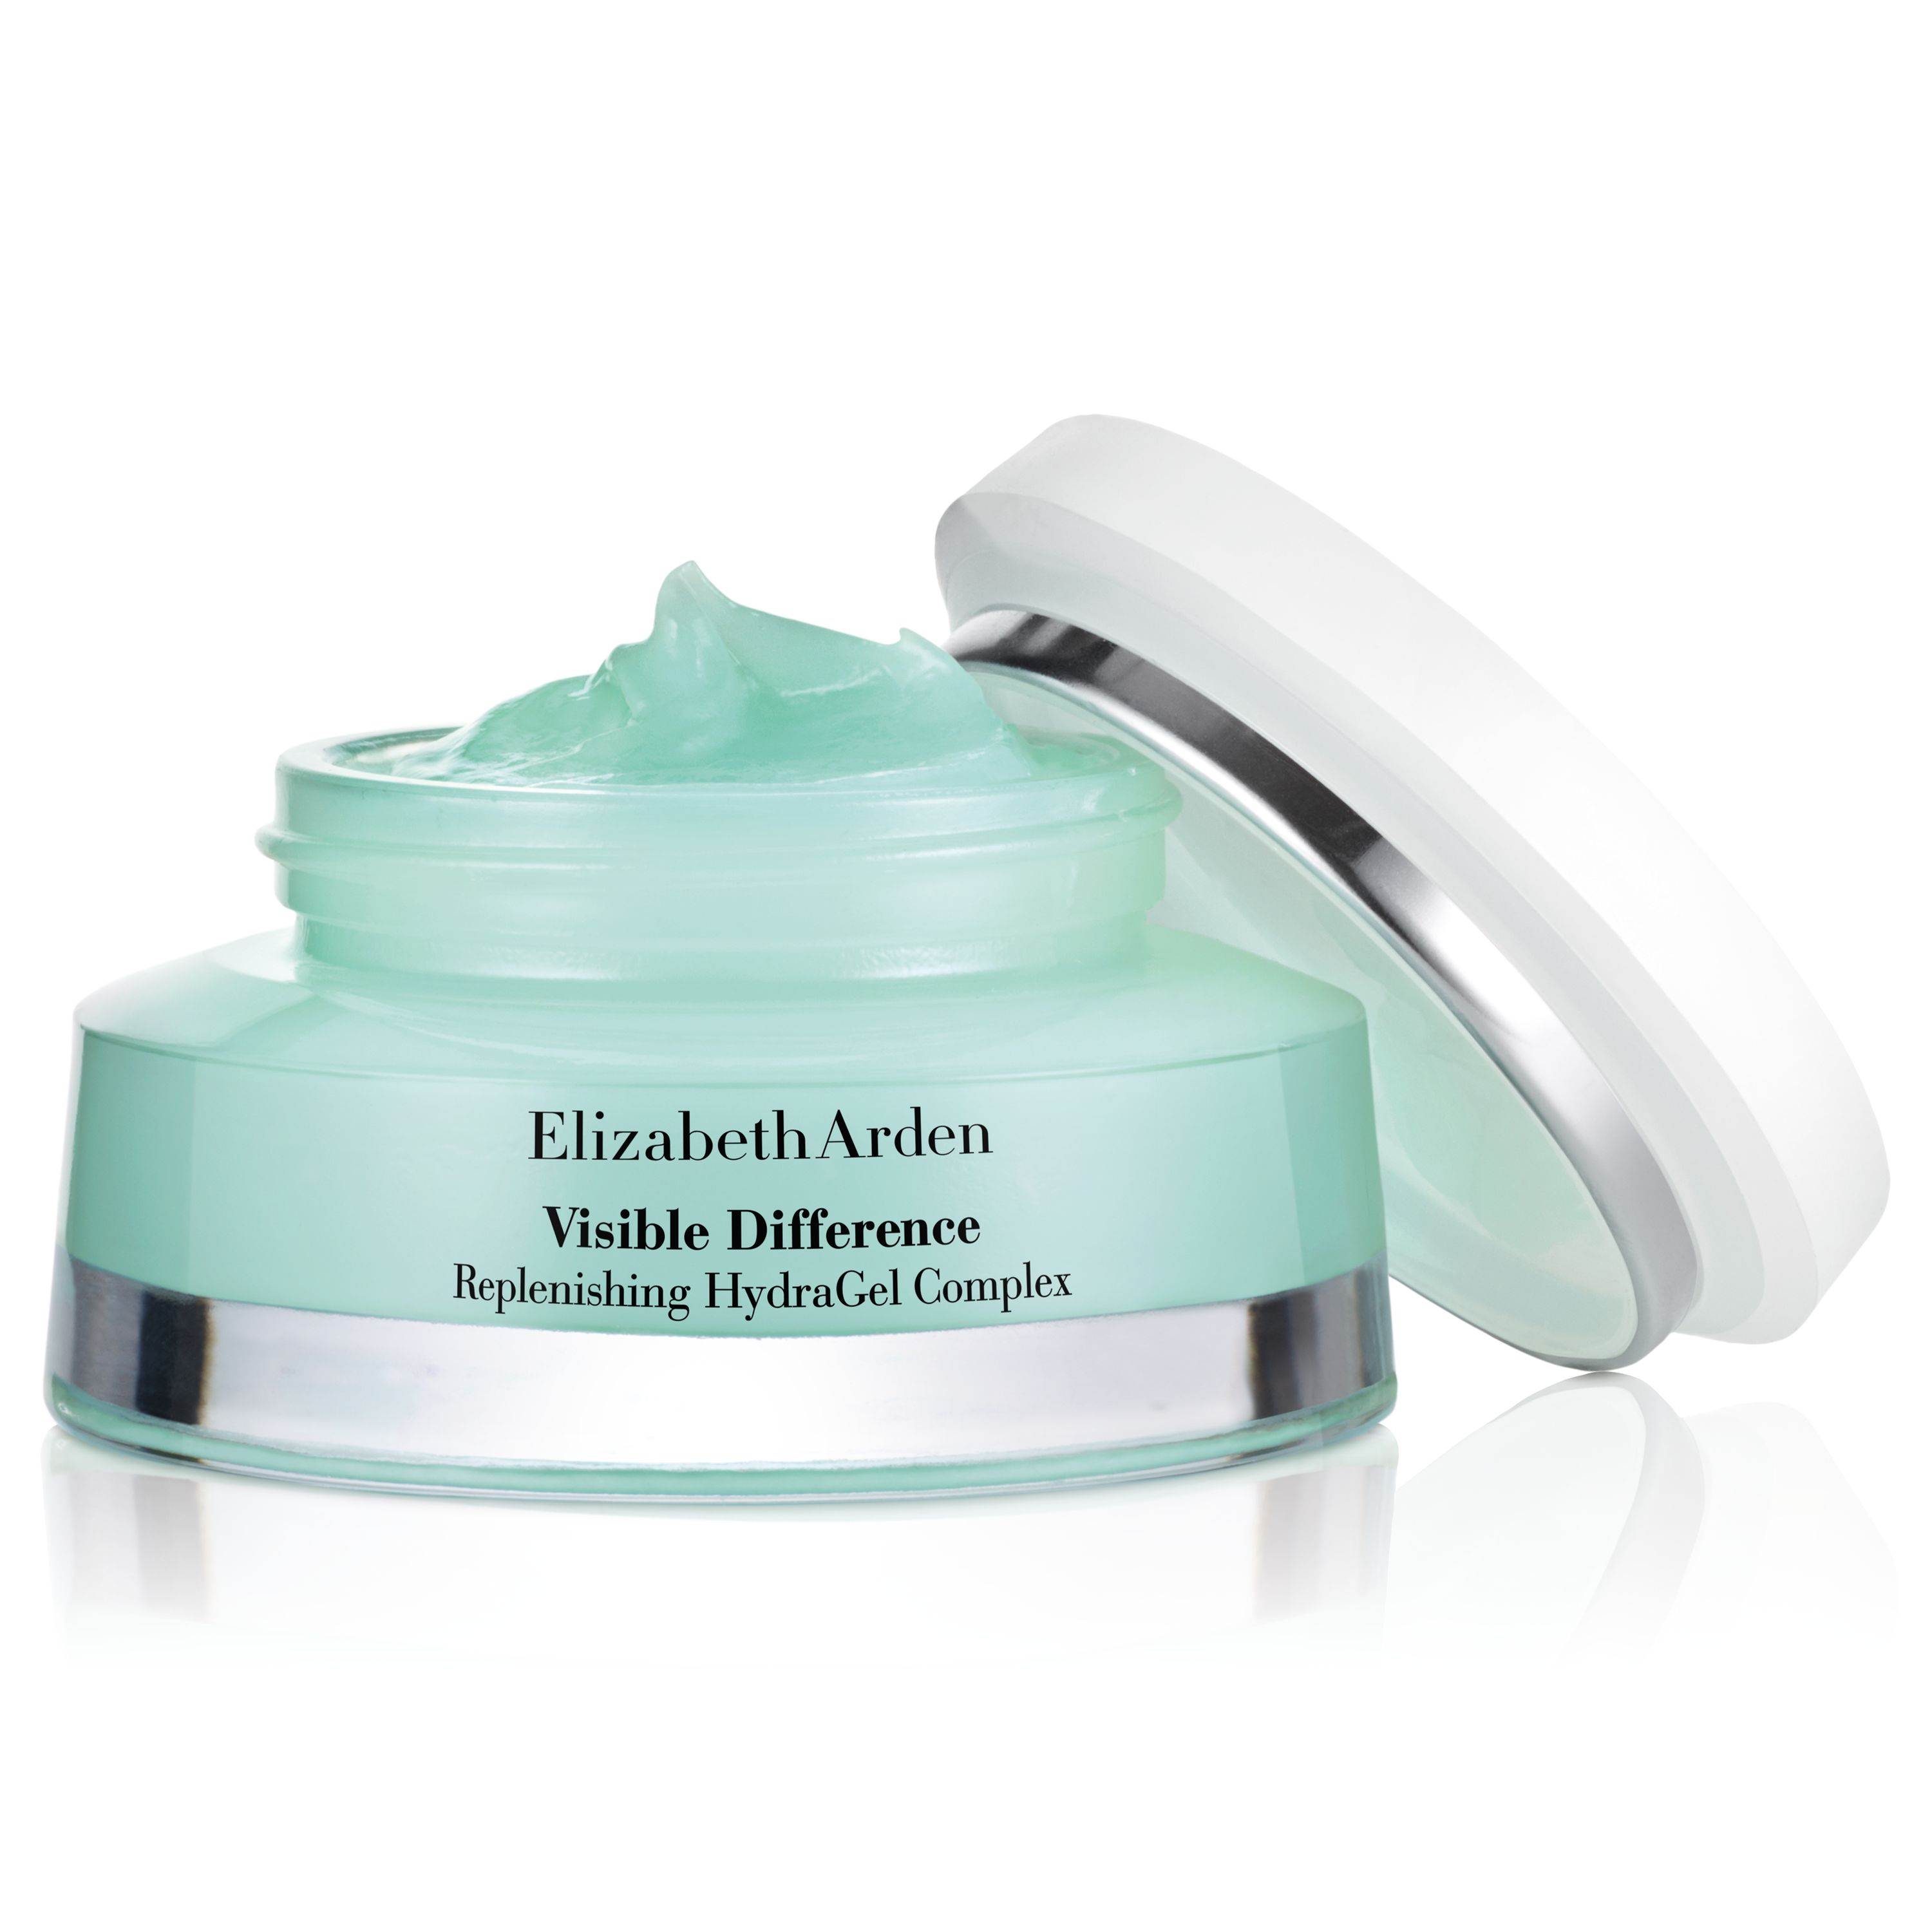  Visible Difference Hydra Gel